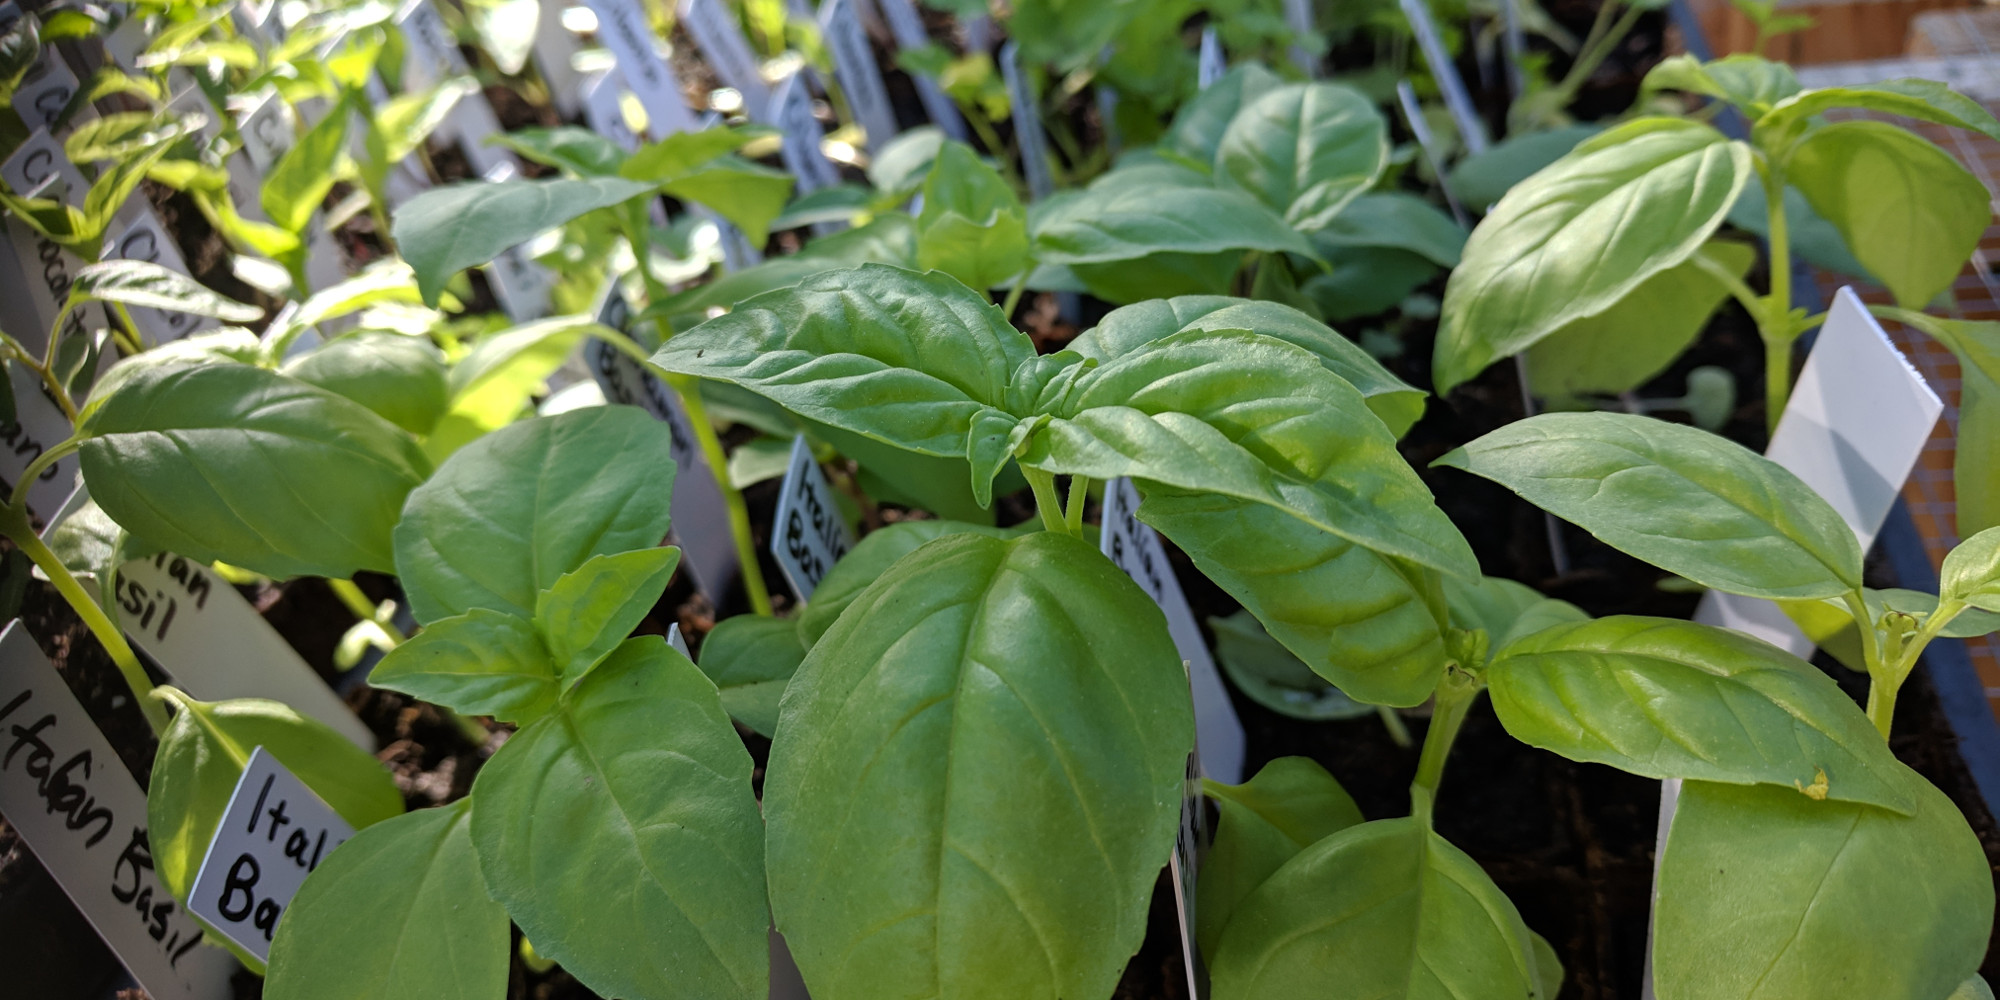 photo: basil plants in greenhouse